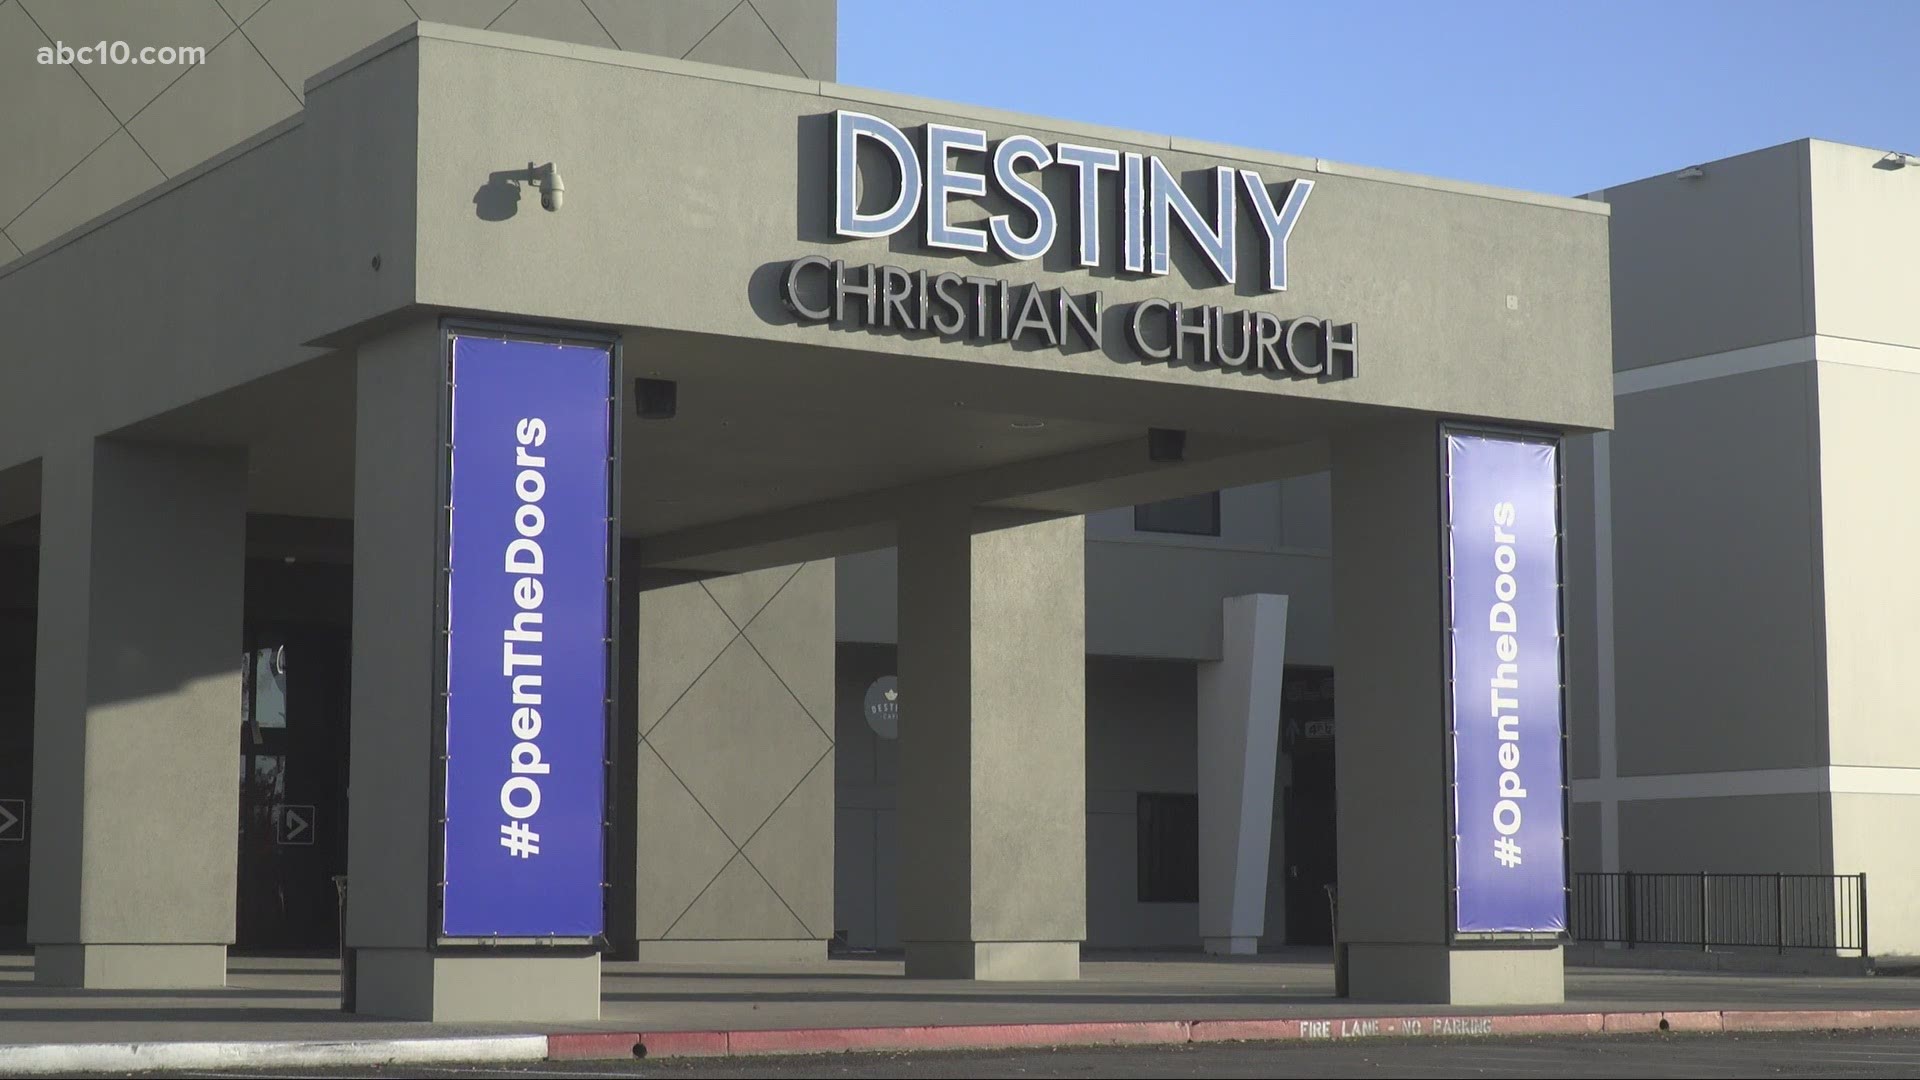 ABC10 spoke to a Rocklin pastor about what the win for New York religious organizations means for California religious groups as well.